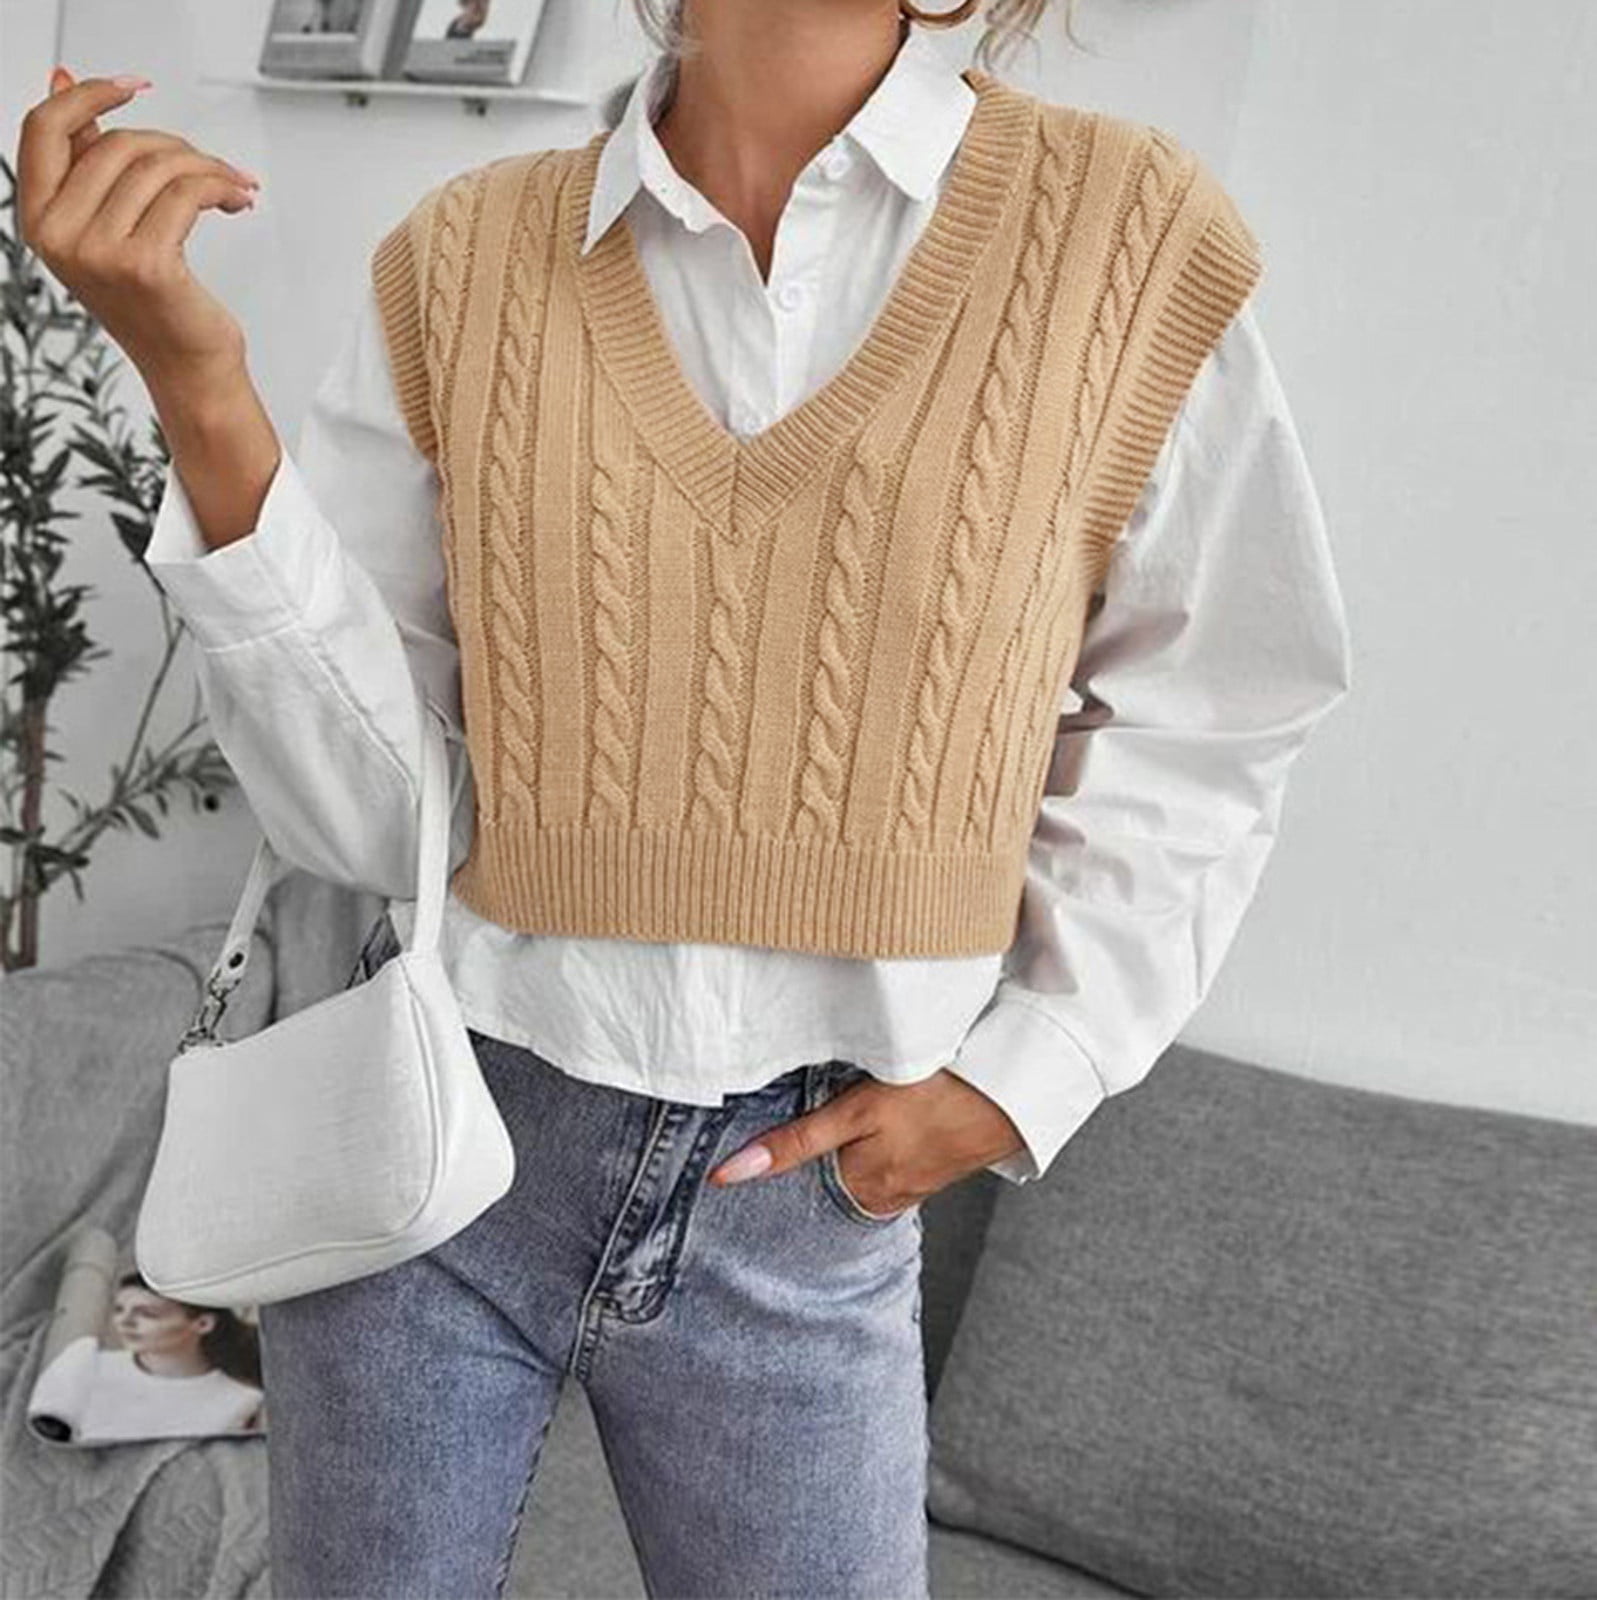 VerPetridure Clearance 2023 Men's Cotton Relaxed Fit Sweater Vests Knit V  Neck Sleeveless Sweater Winter Warm Pullover Sweater Tops 